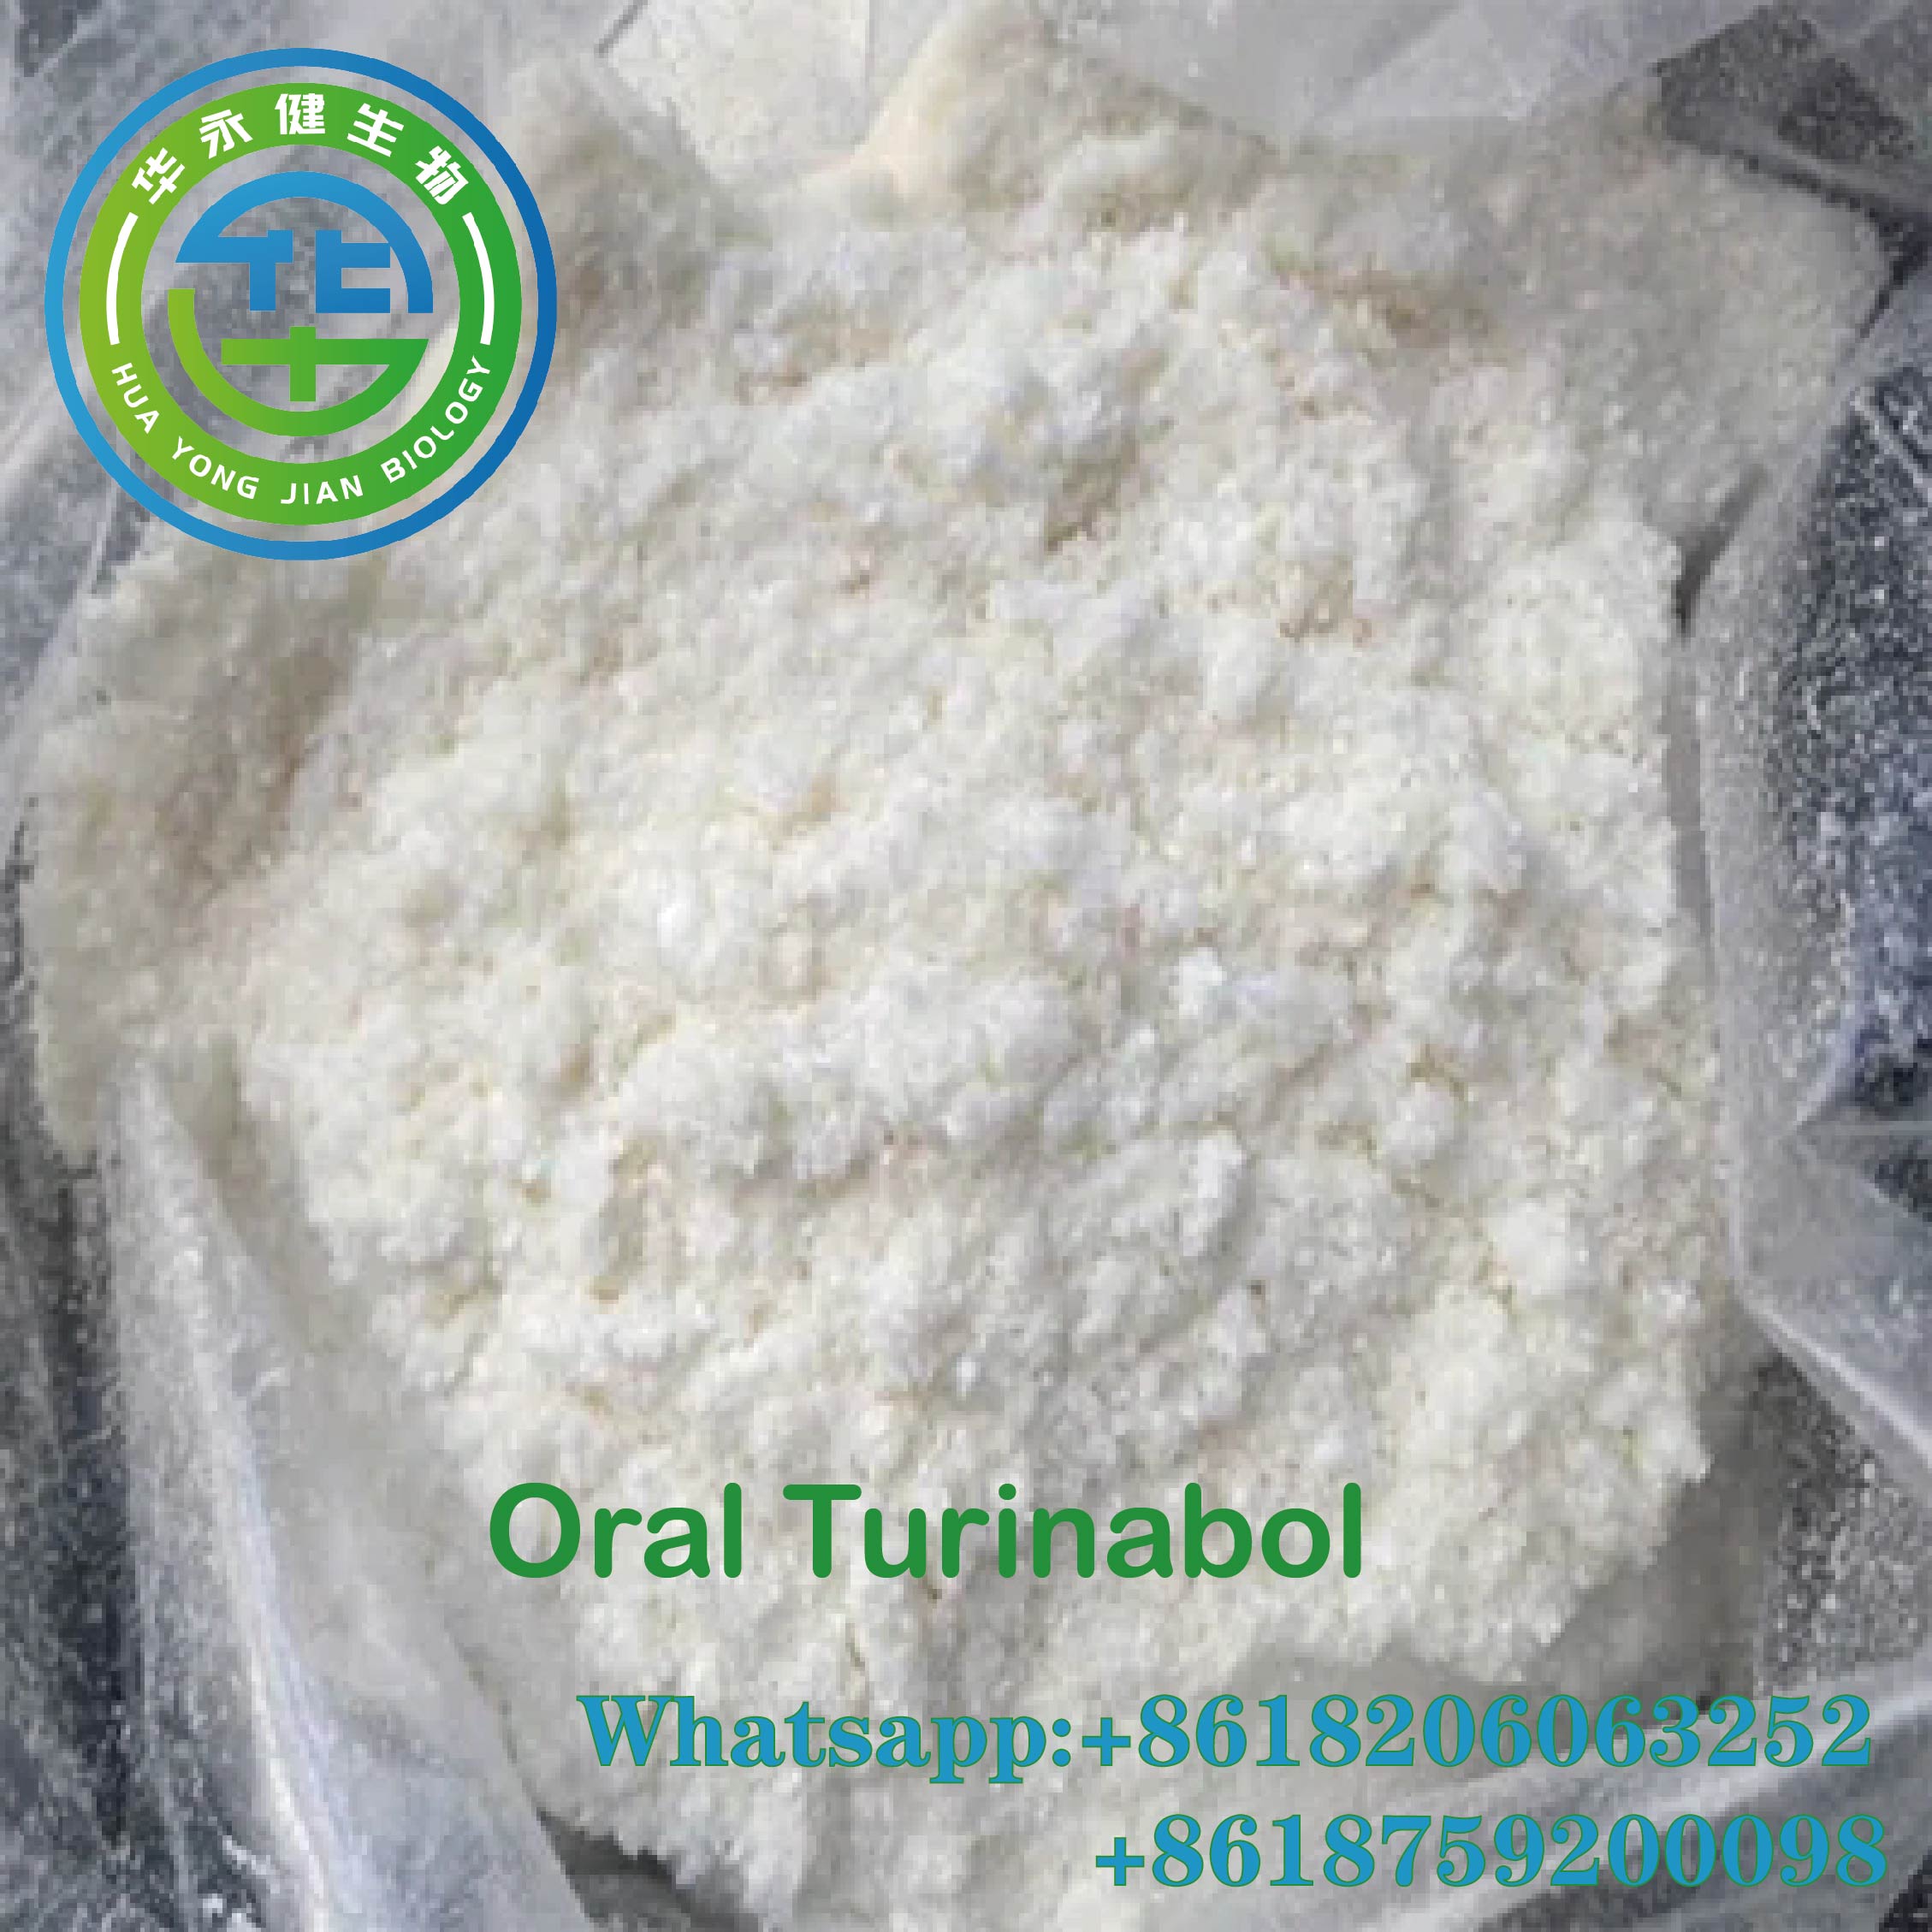 Real Oral Turinabol Steroids Powder for Muscle Gain and Fitness with Free Sample Available 4-Chlorodehydromethyltestosterone